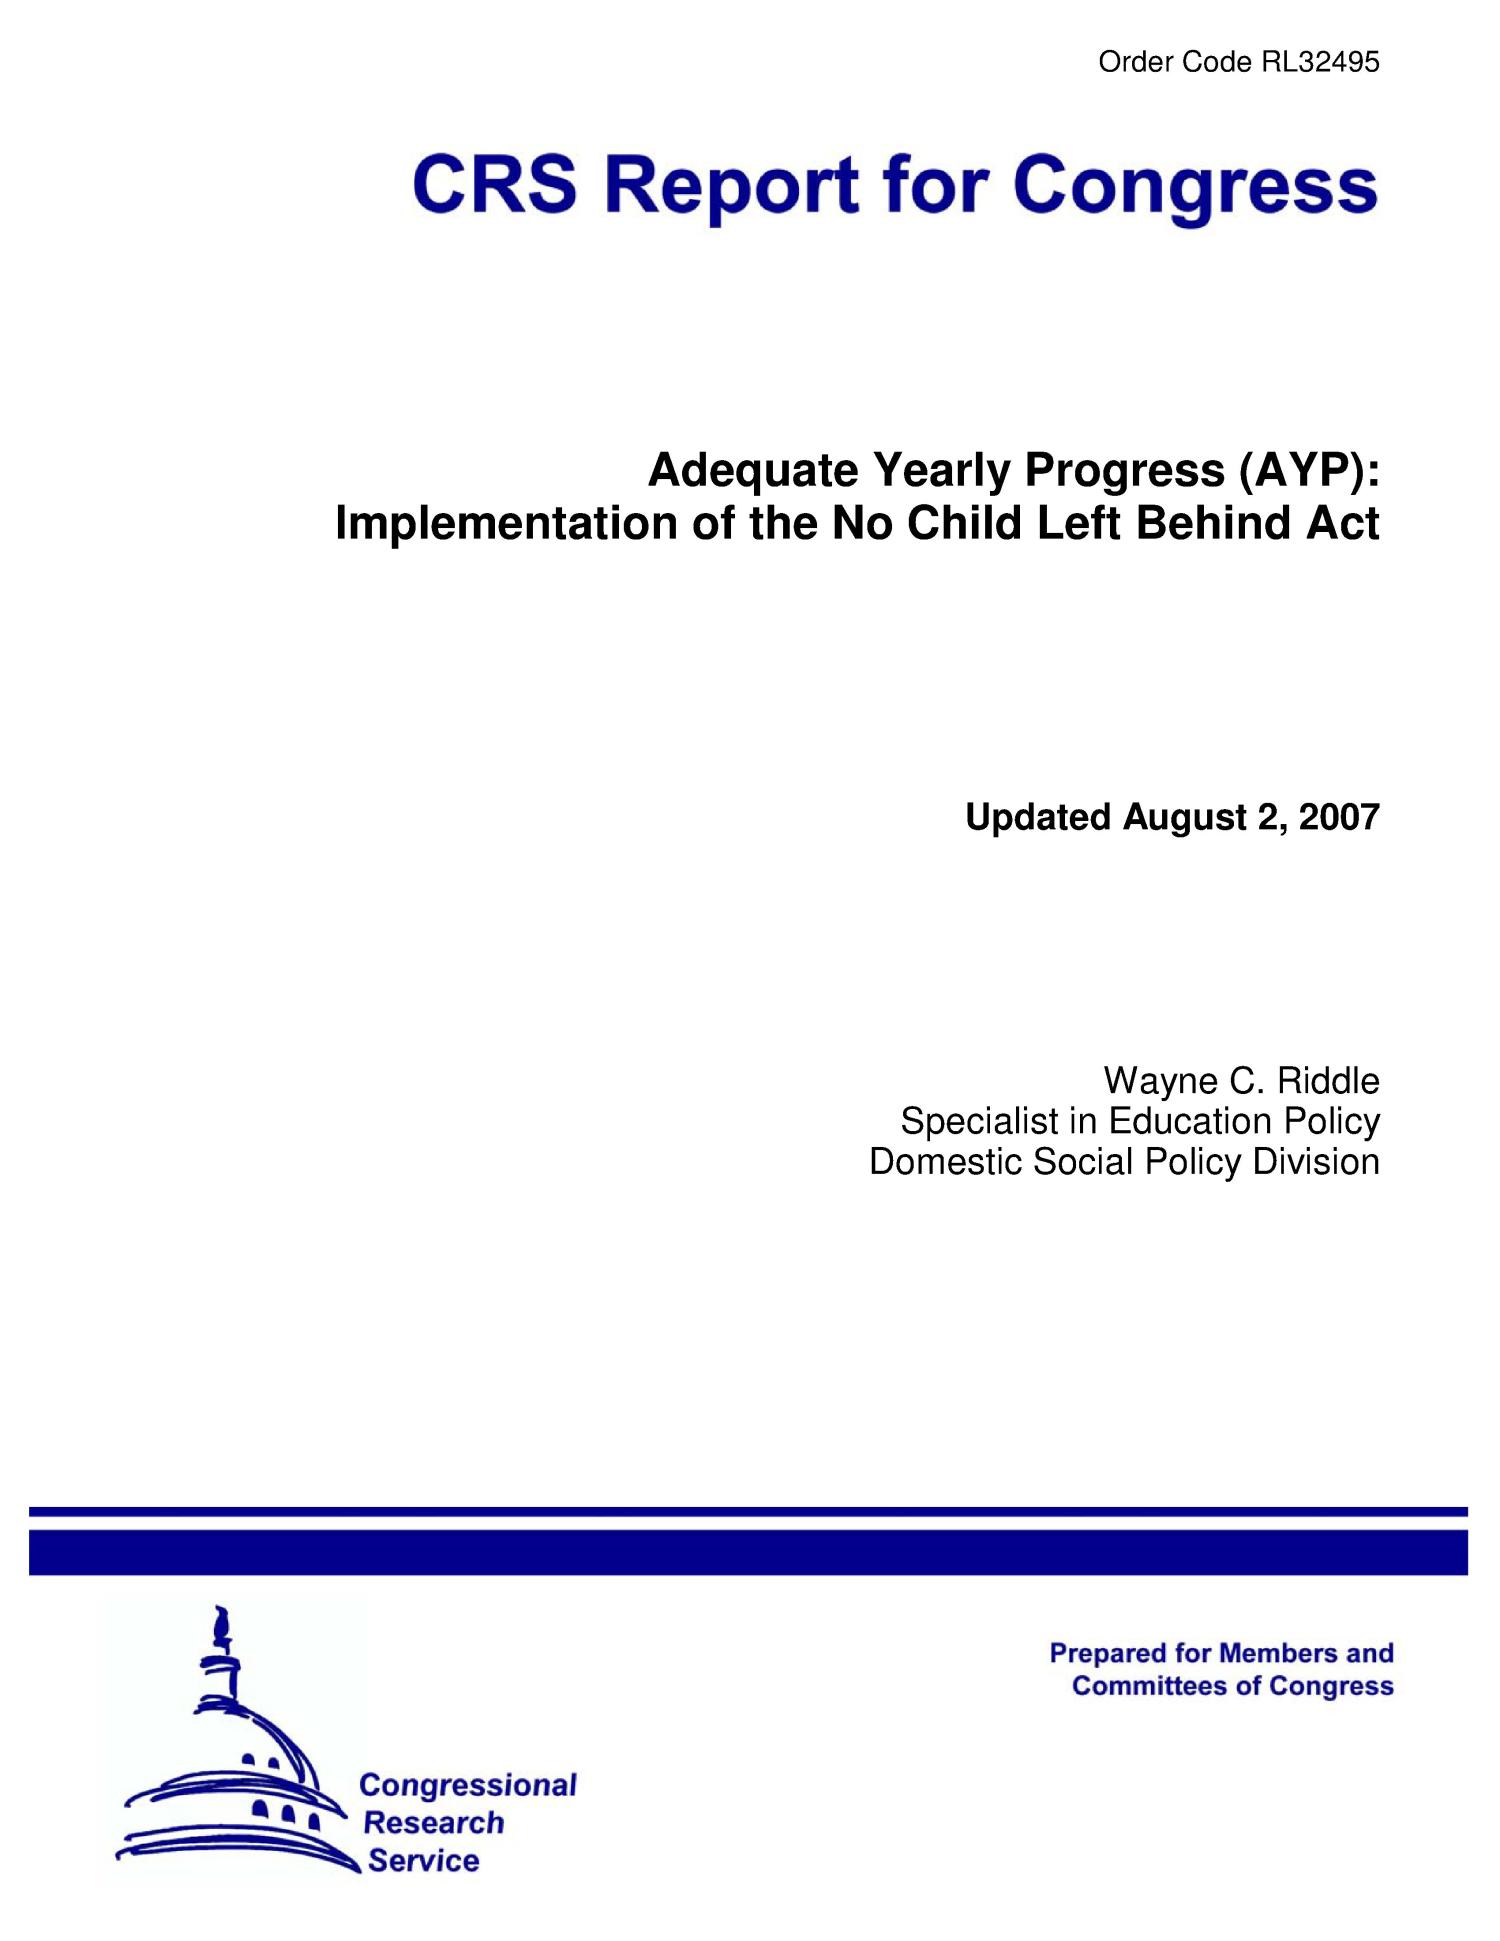 Adequate Yearly Progress (AYP): Implementation of the No Child Left Behind Act
                                                
                                                    [Sequence #]: 1 of 40
                                                